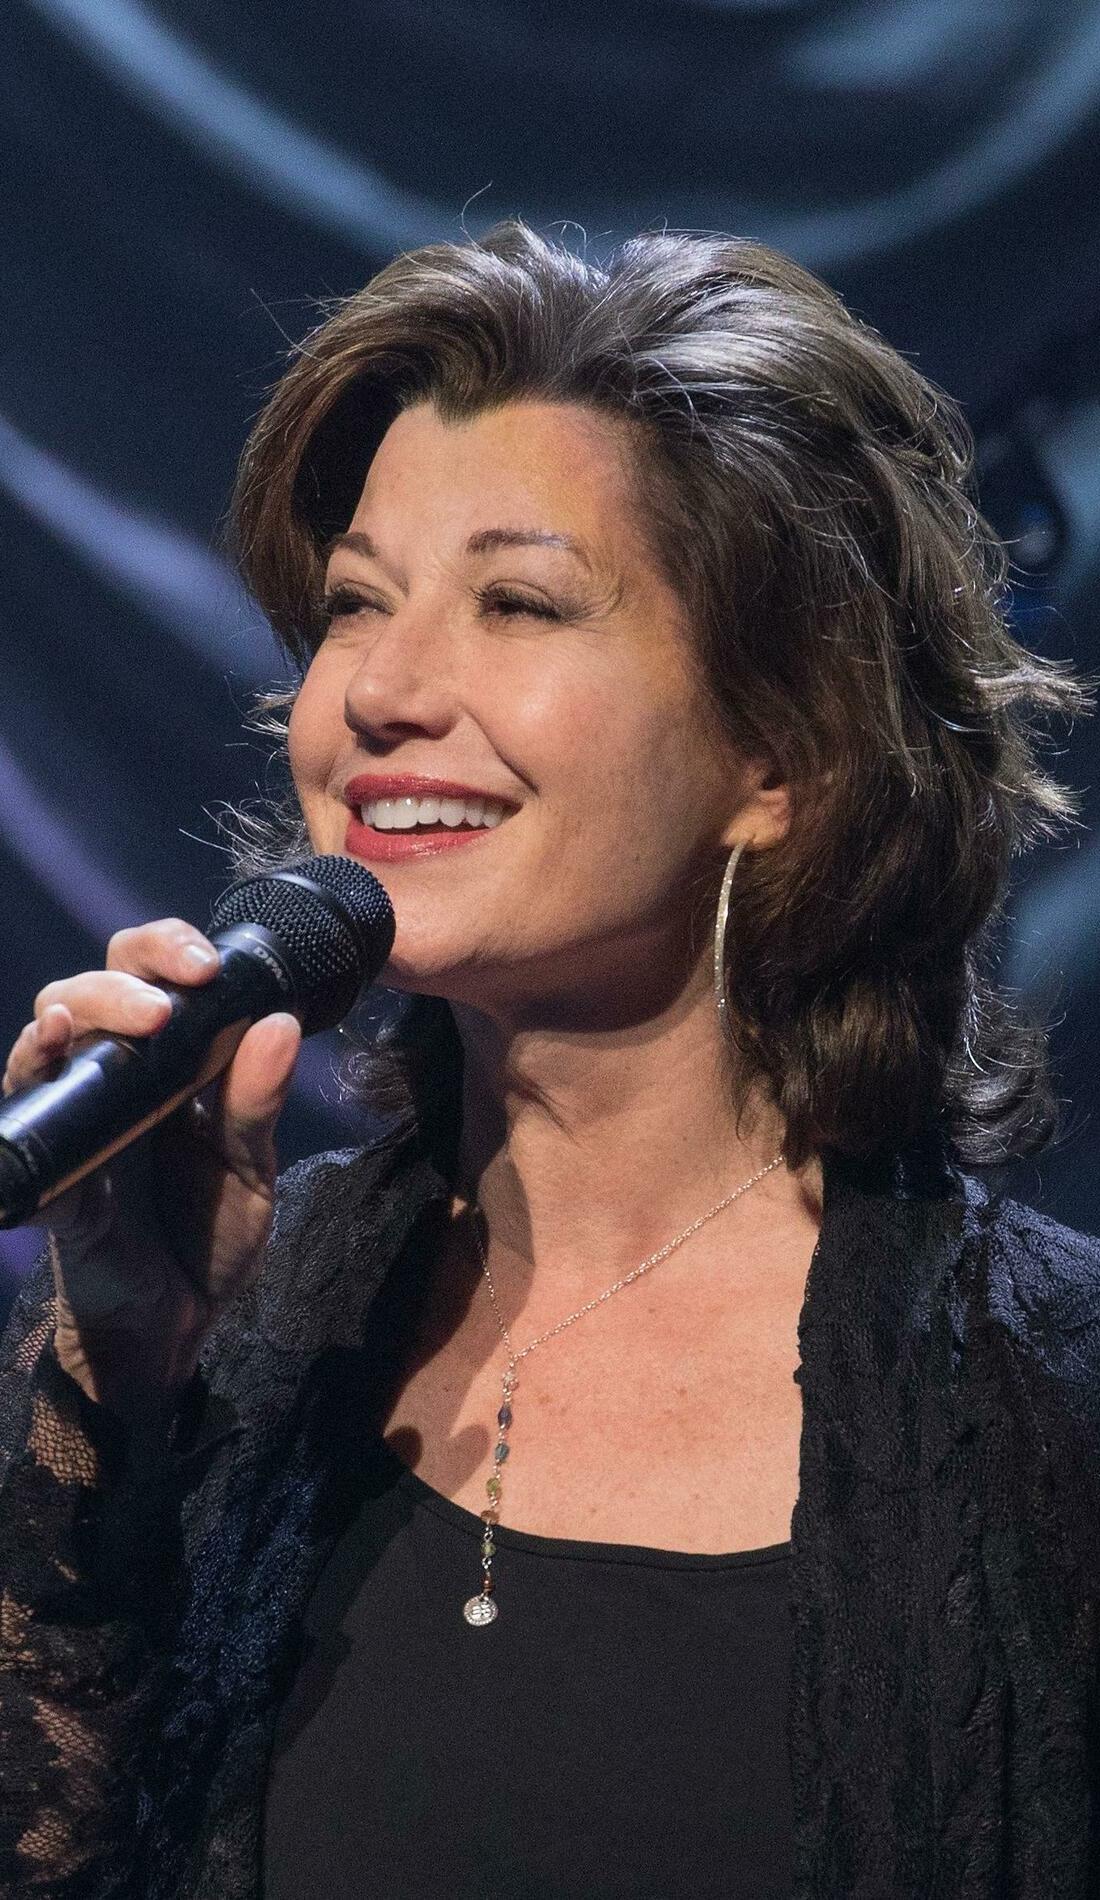 A Amy Grant live event